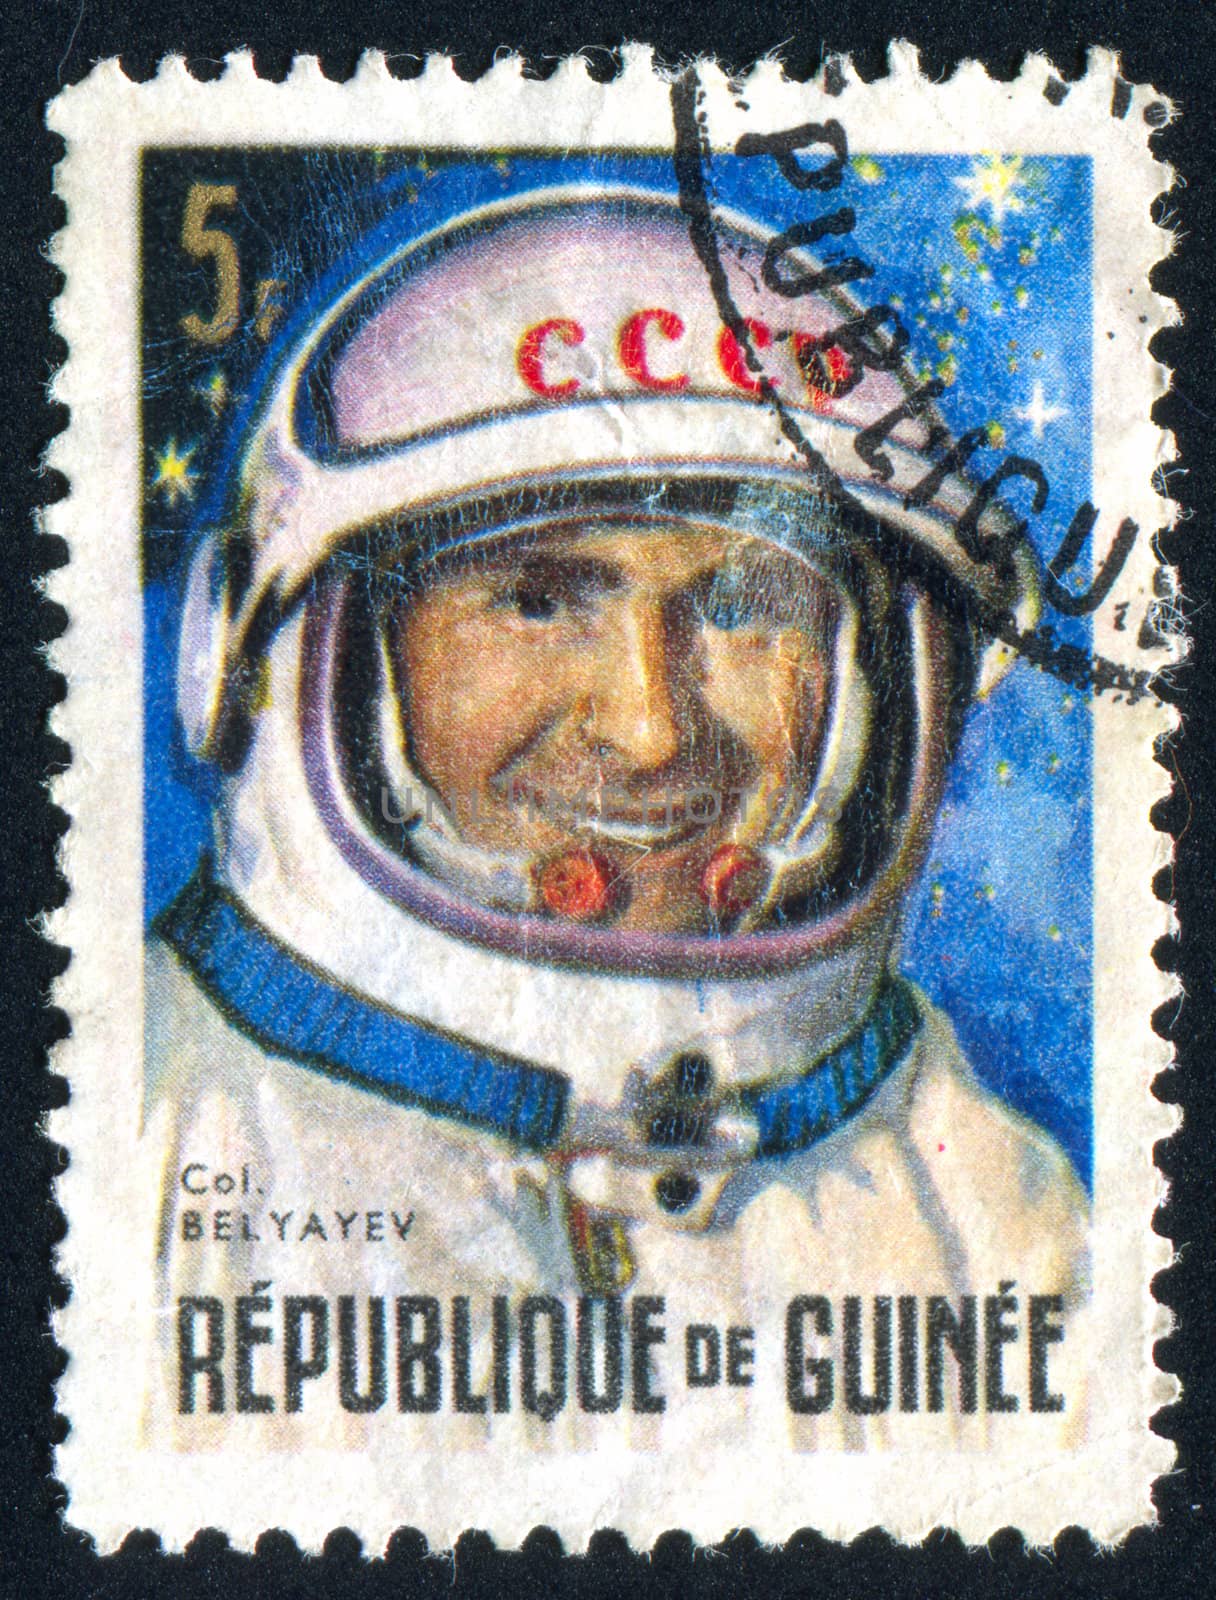 GUINEA - CIRCA 1965:   stamp printed by Guinea,  shows Russian Achievements in Space Pavel Belyayev, circa 1965.